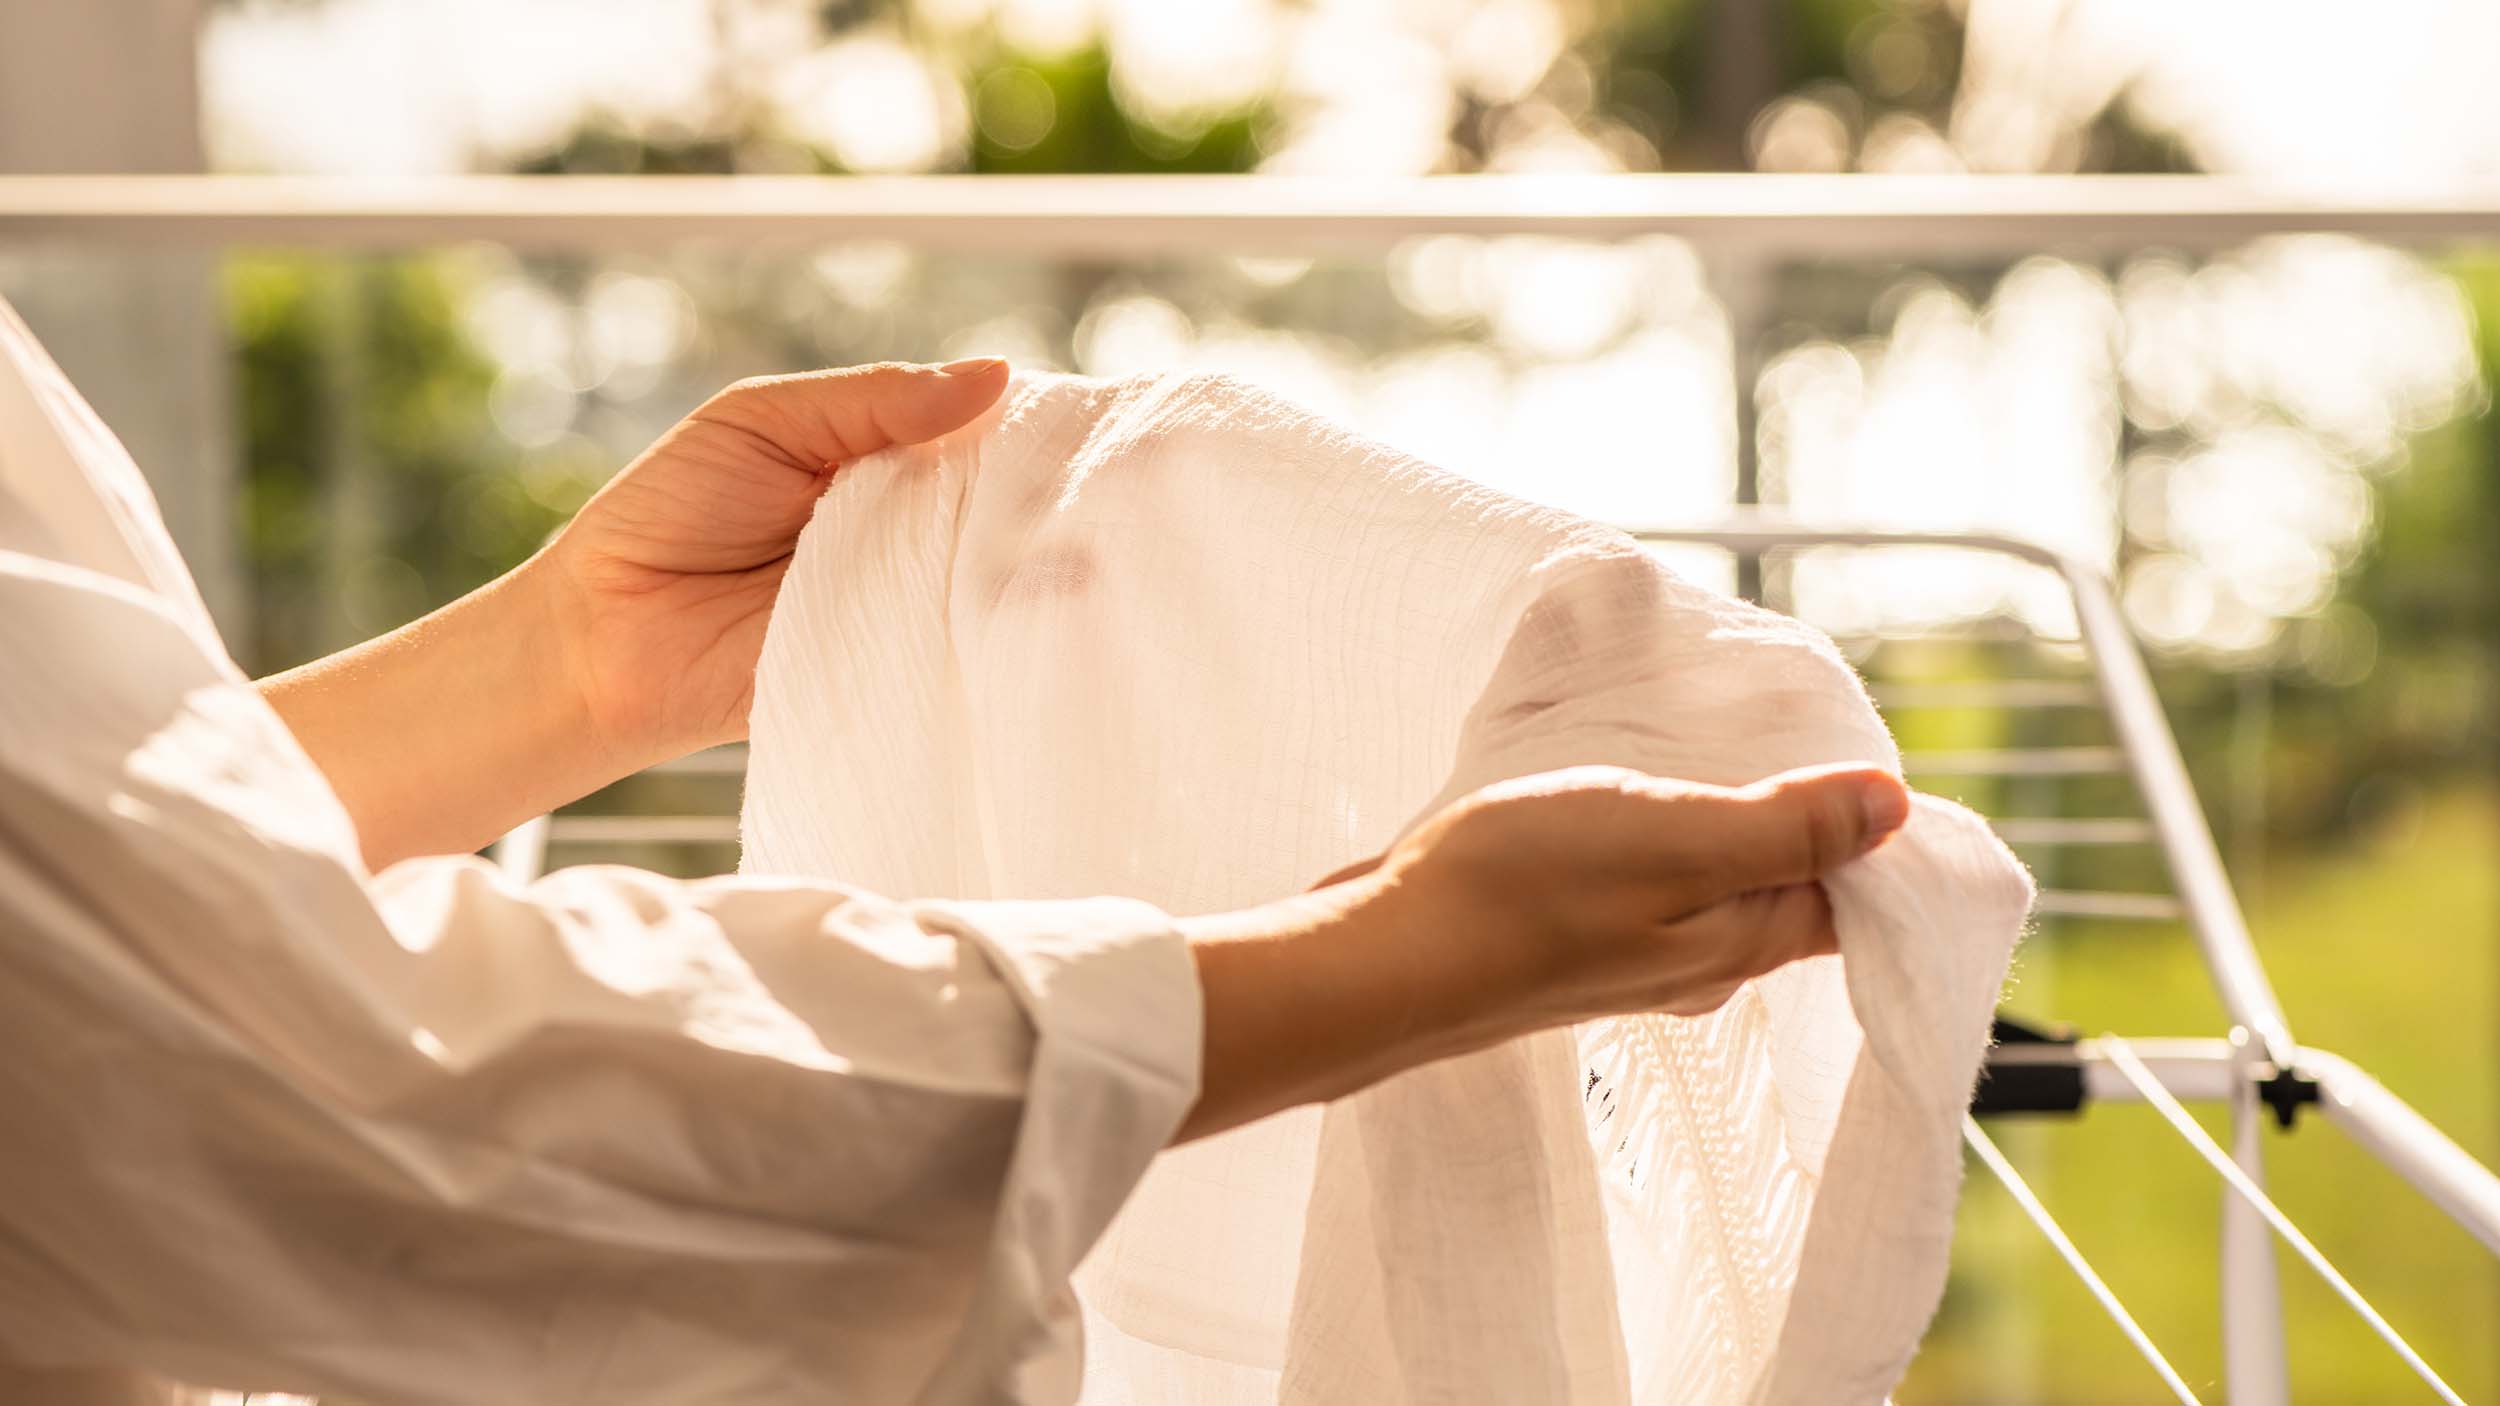 How to get sunscreen stains out of clothes and other fabrics